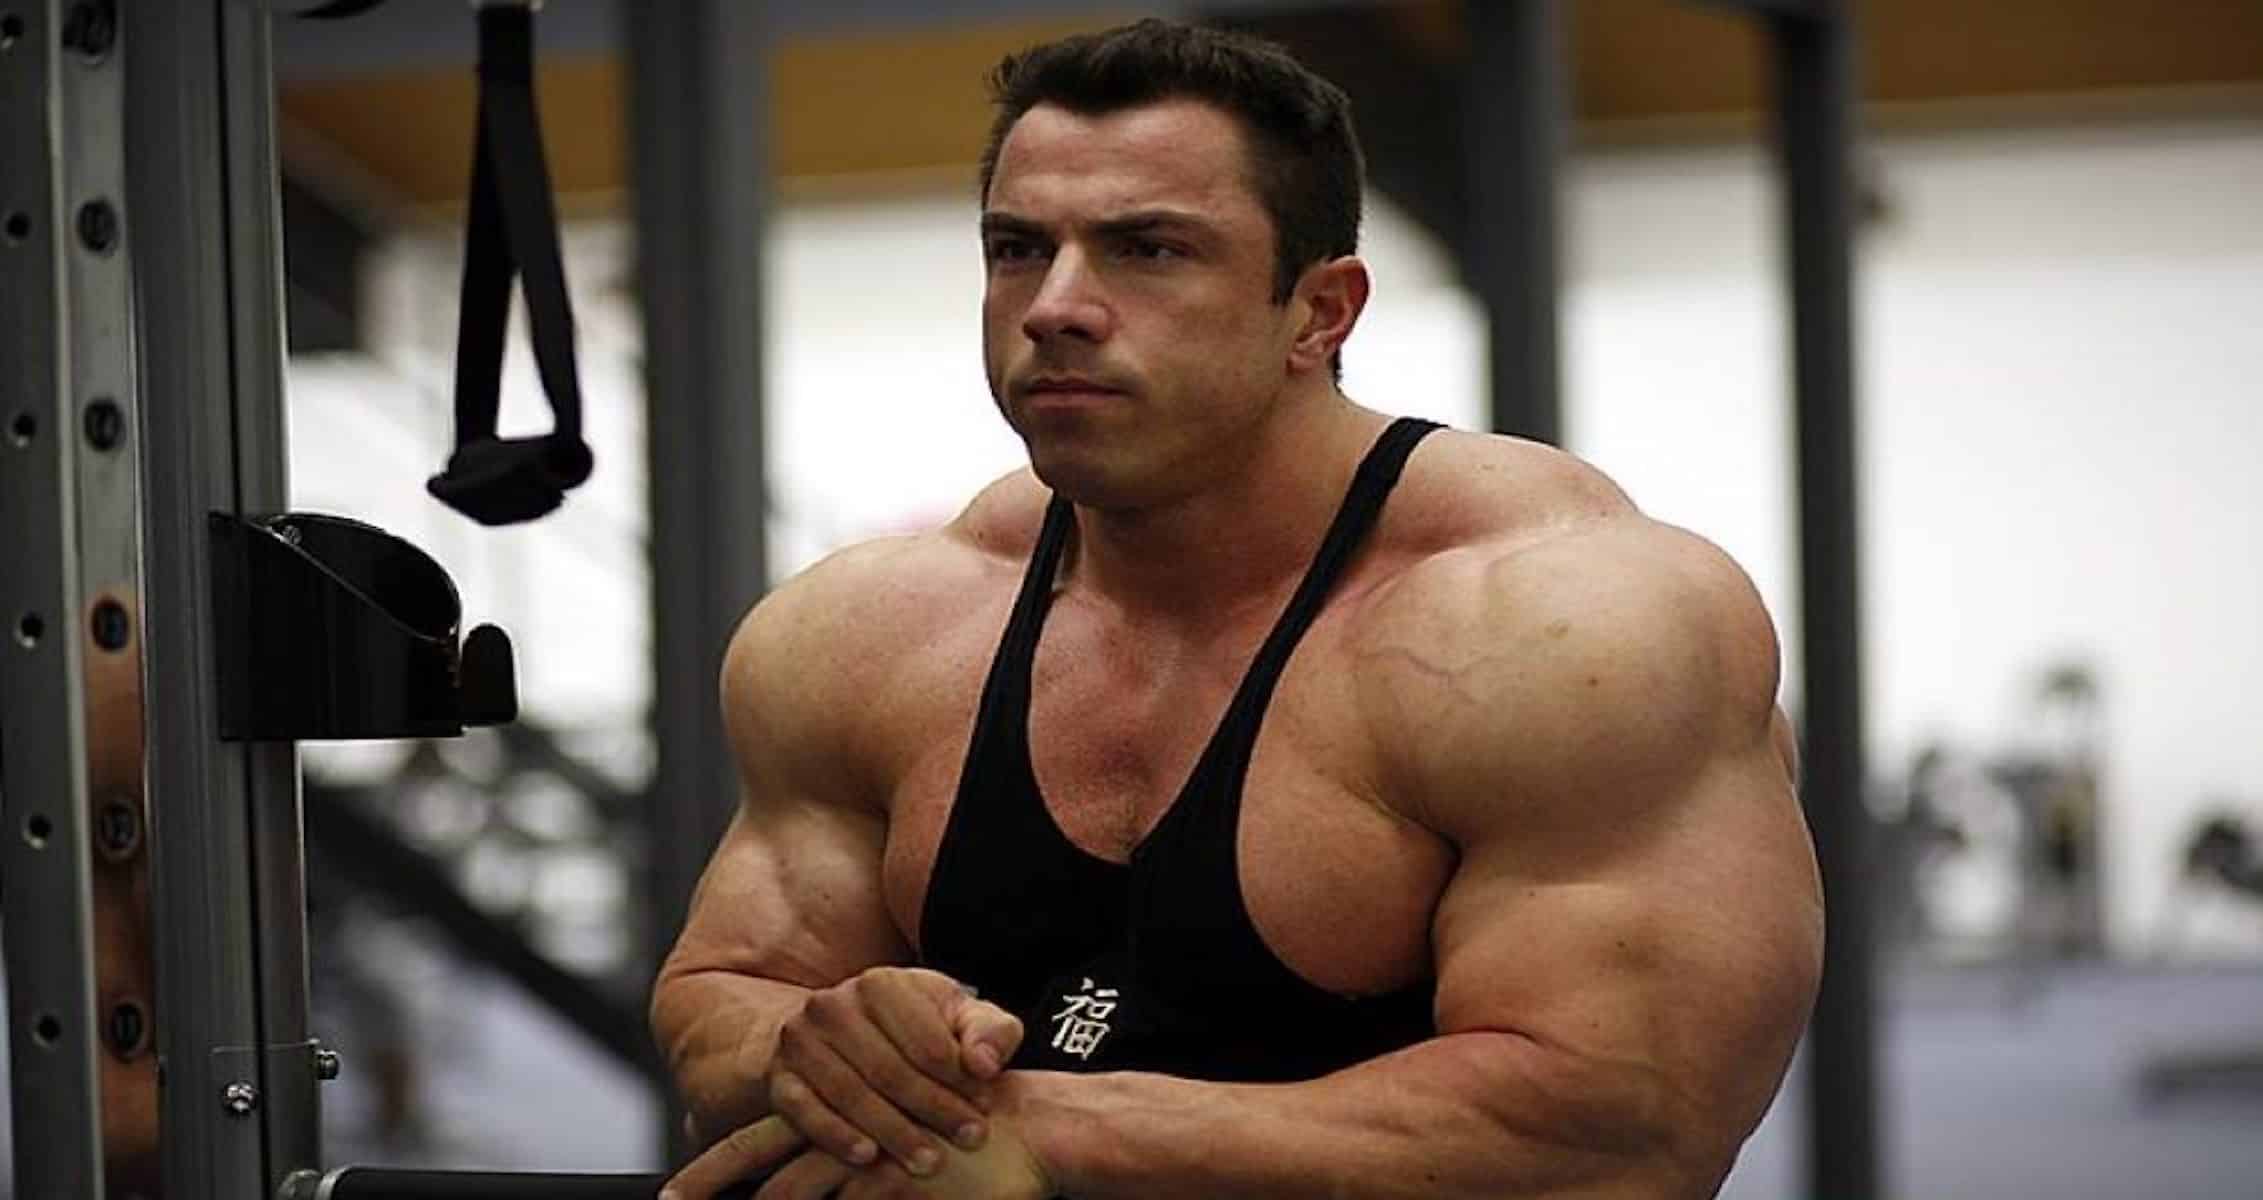 Bodybuilder Andreas Frey Has Passed Away At 43 Years Old